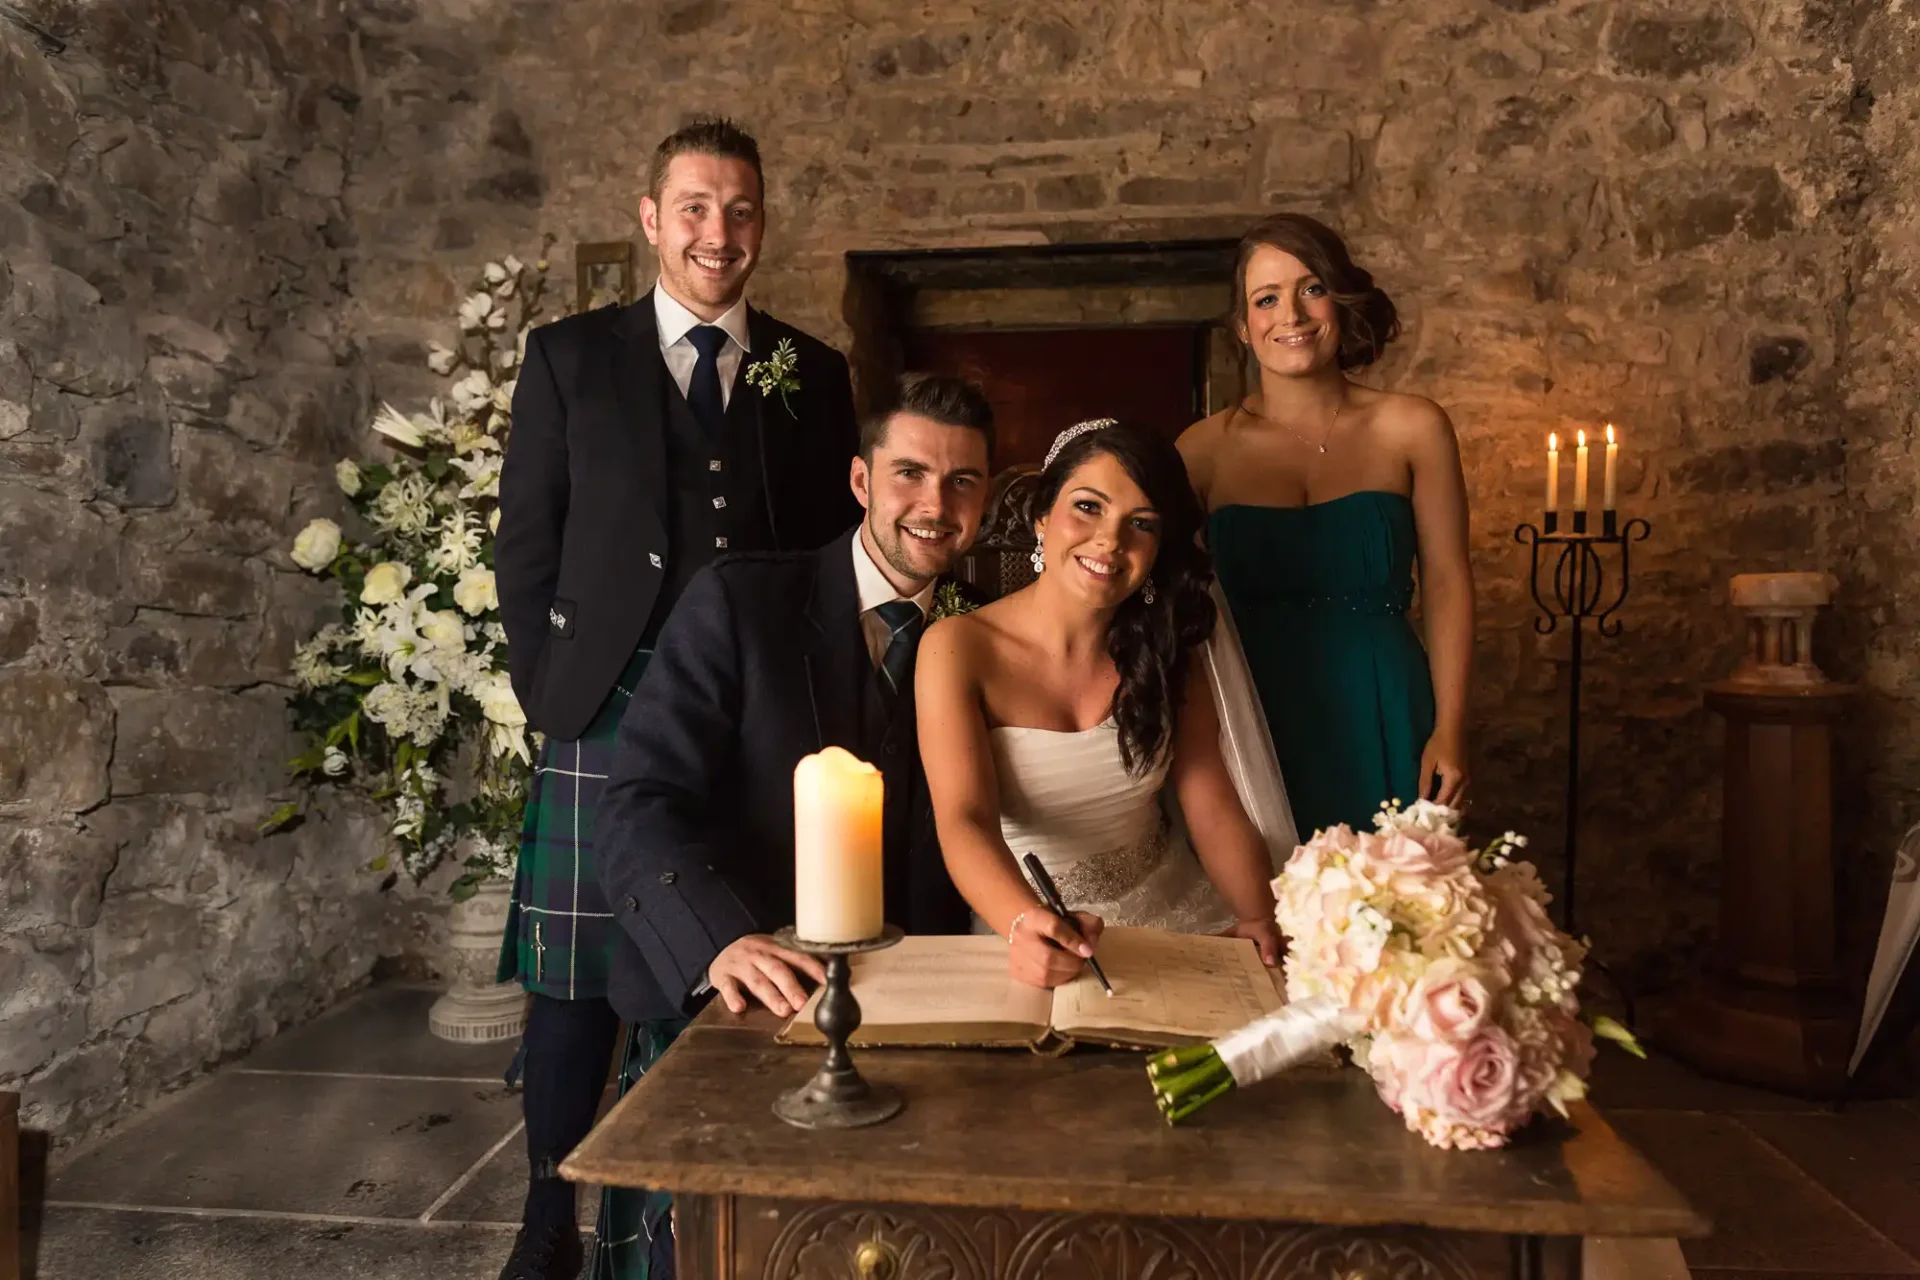 A newlywed couple signs a marriage register flanked by a best man and a bridesmaid in a candle-lit stone room.